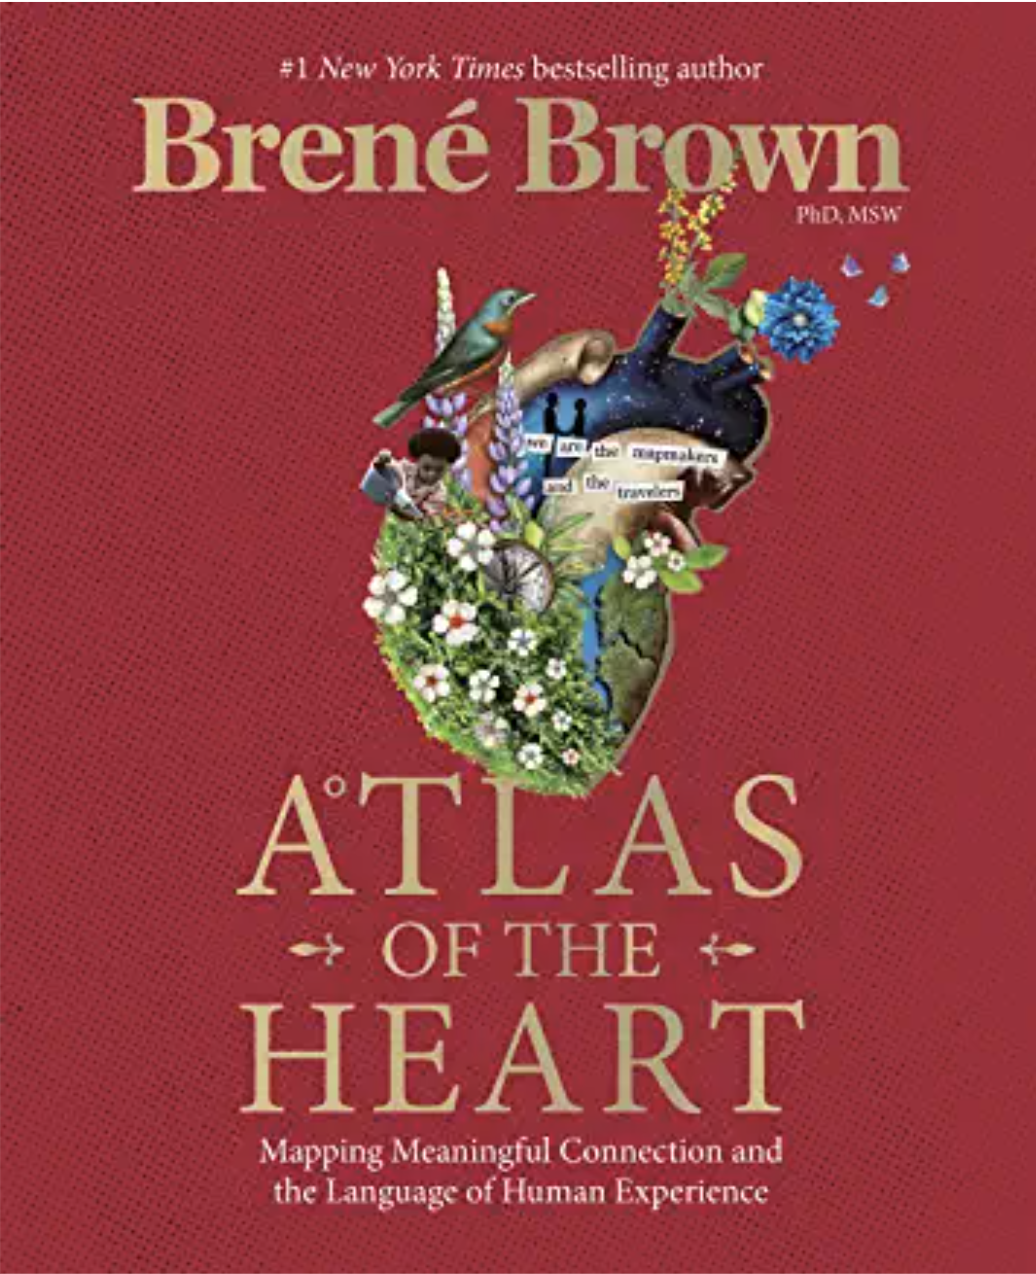 Atlas of the Heart Book by Brene Brown